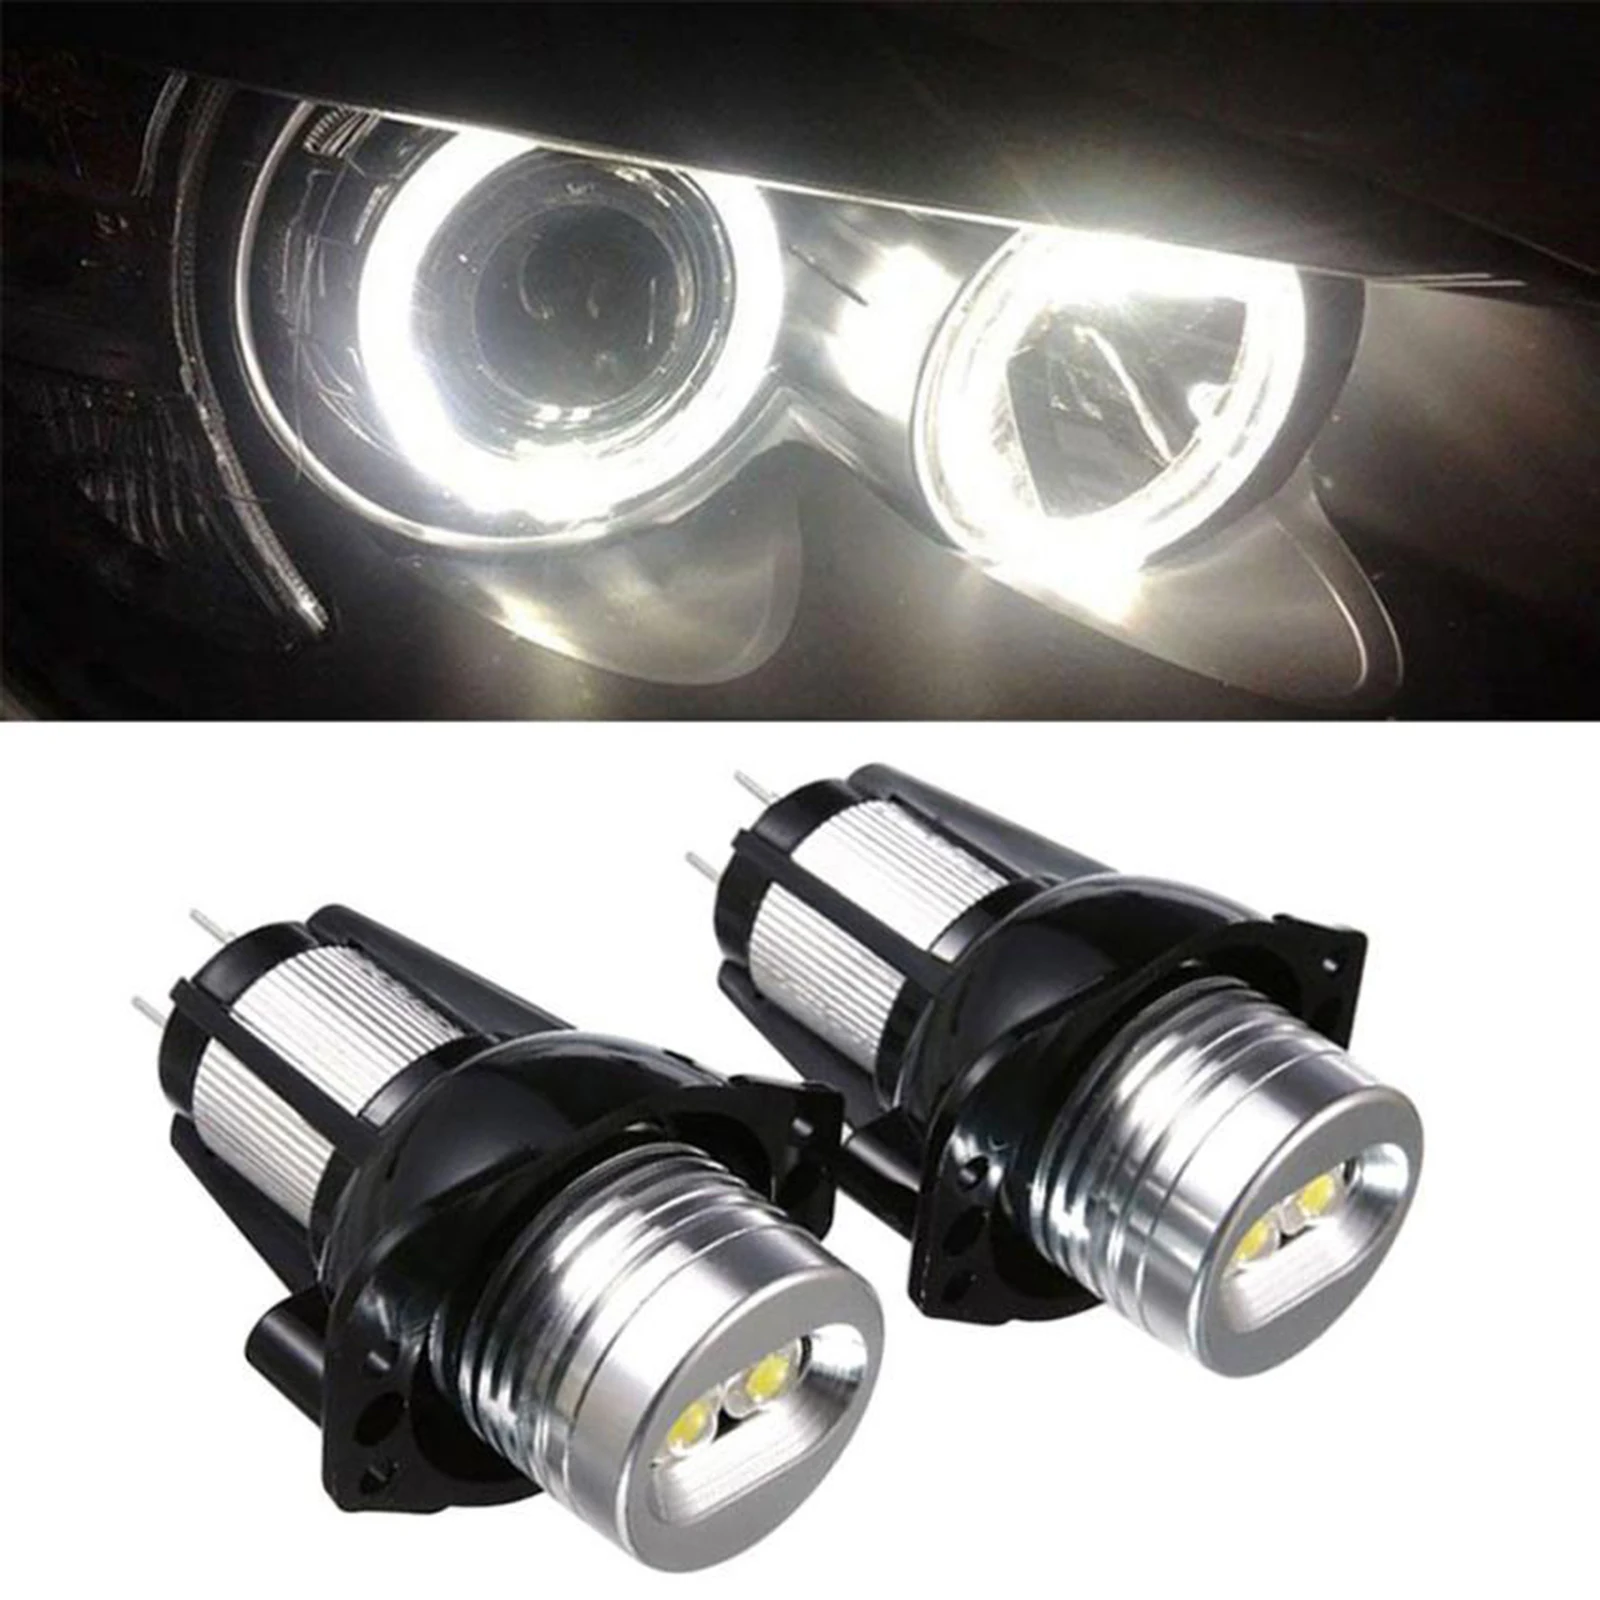 2Pcs High Power Angel Eyes Light Bulb, 12W 12V 6000K, Compatible with for BMW E90 E91 05-08 Replace Parts Accessories